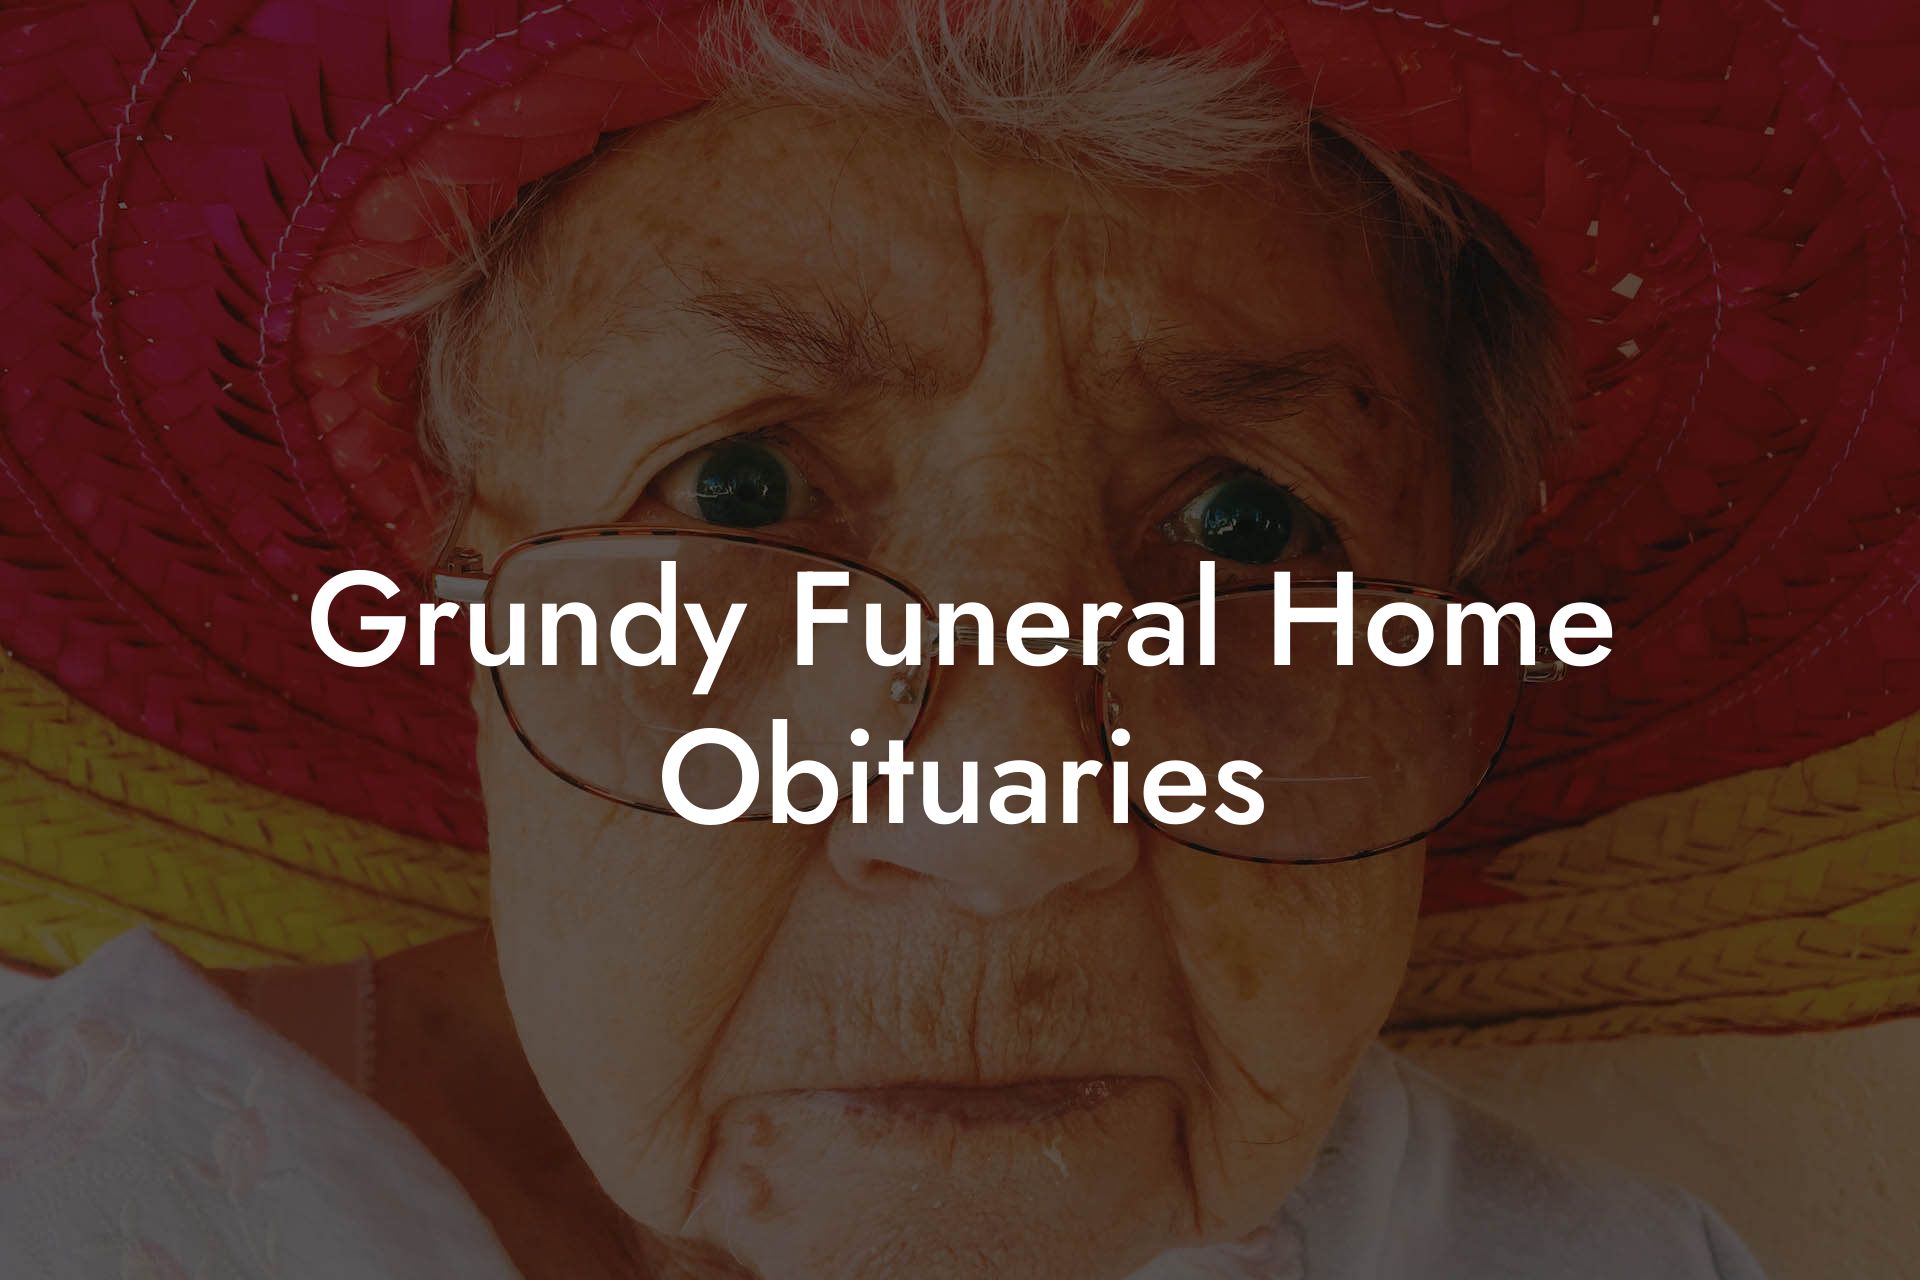 Grundy Funeral Home Obituaries